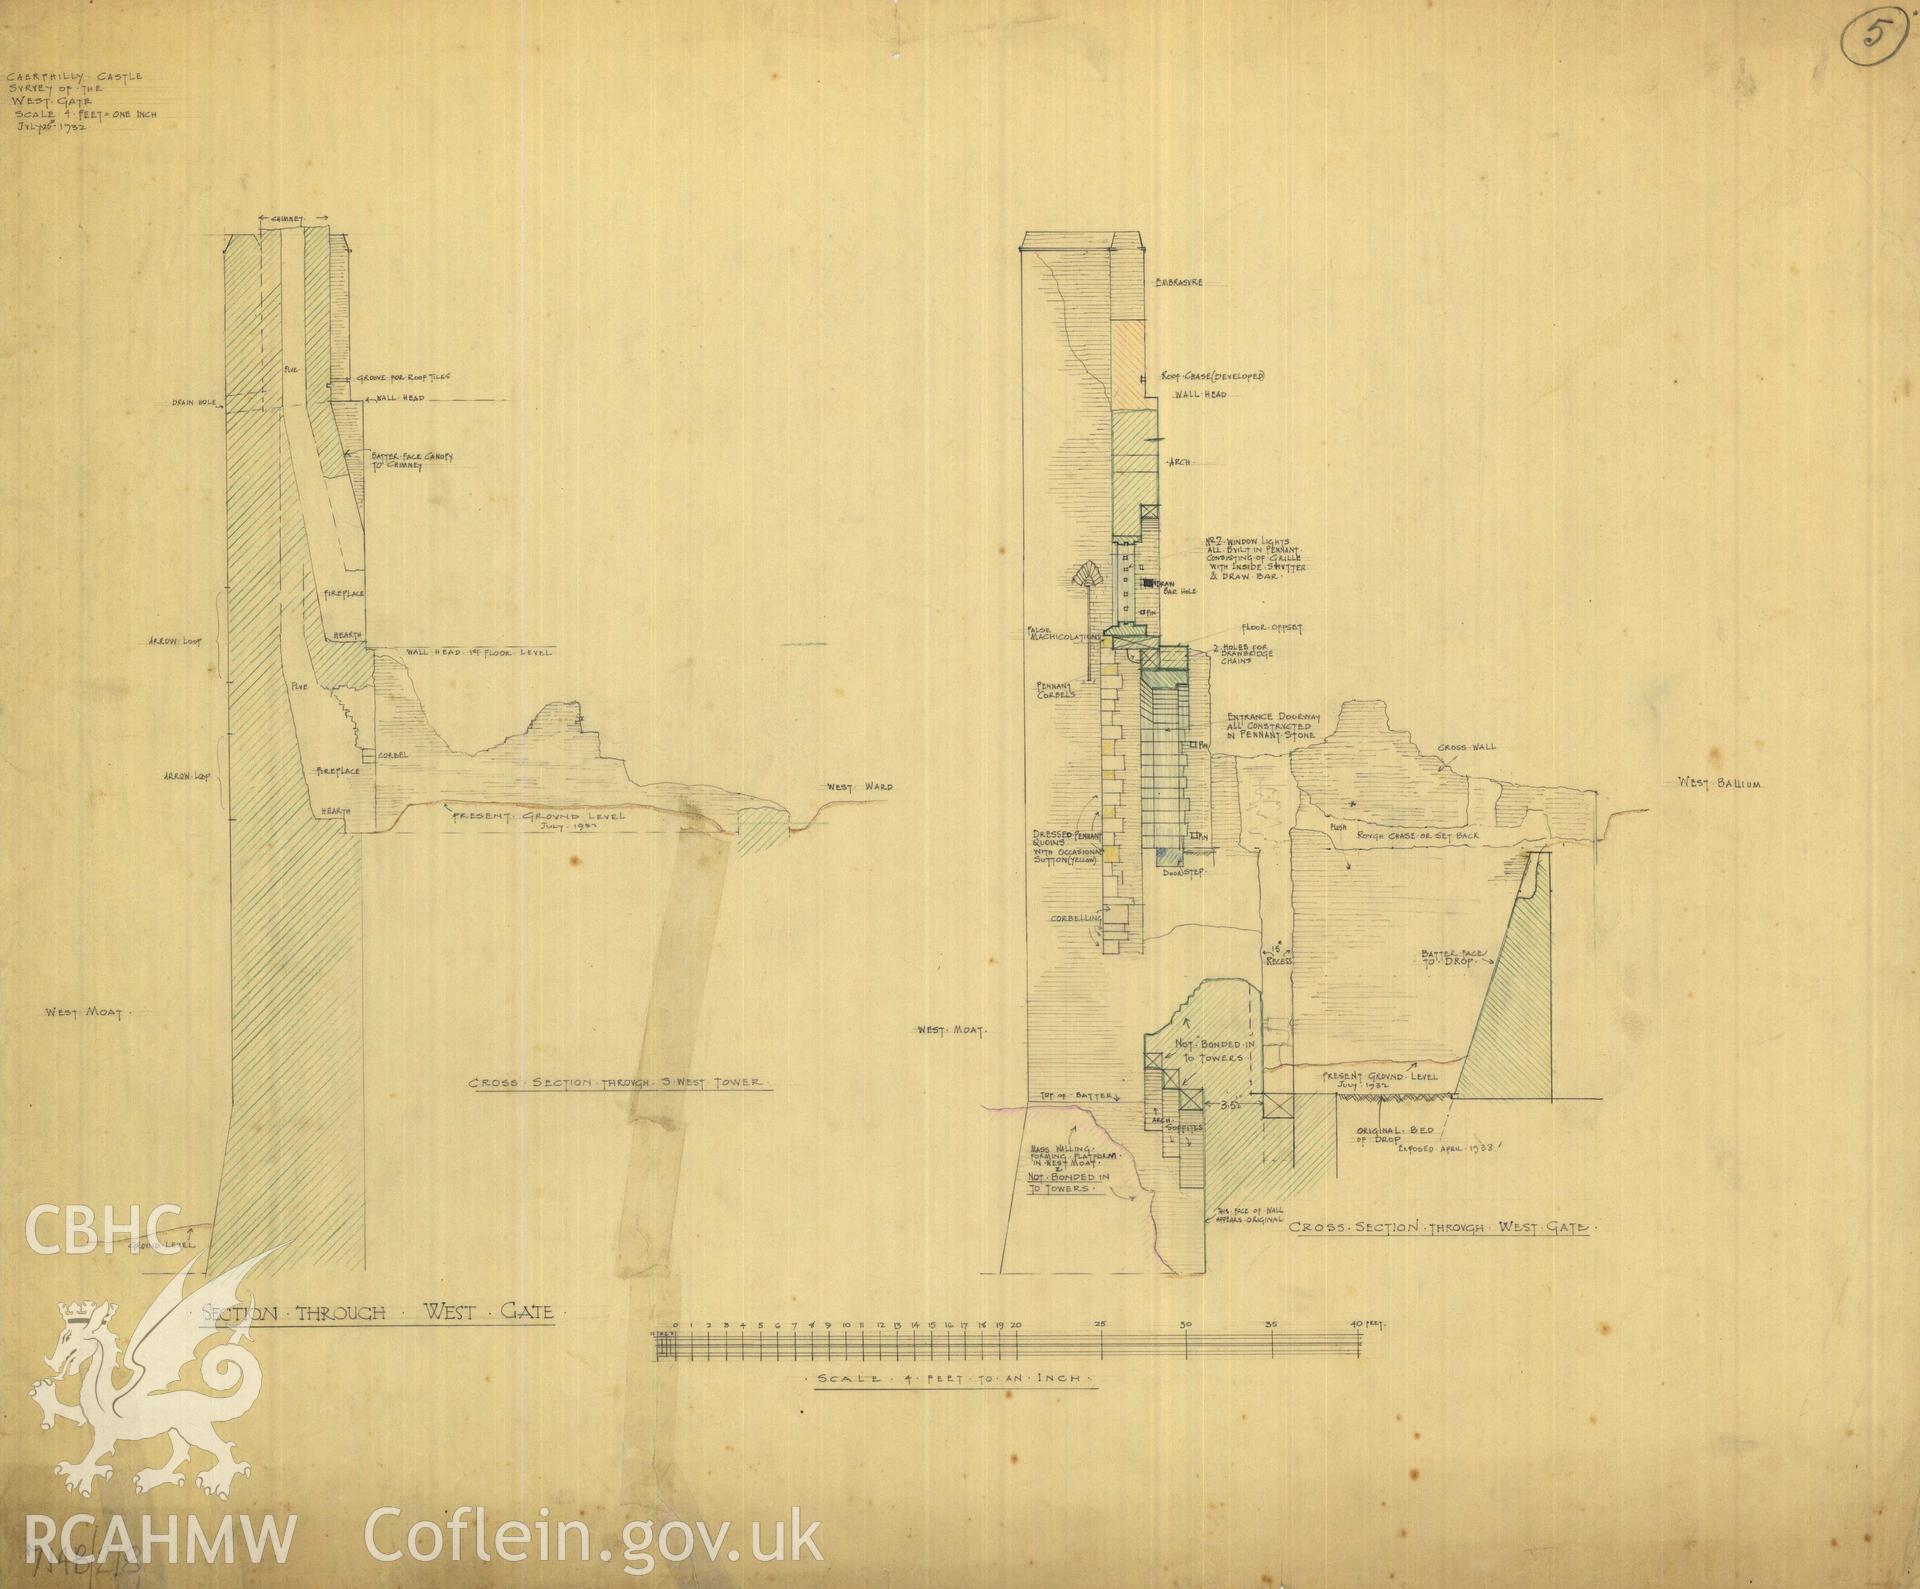 Cadw guardianship monument drawing of Caerphilly Castle. Mid W gate, sections. Cadw Ref. No:714B/218. Scale 1:48.